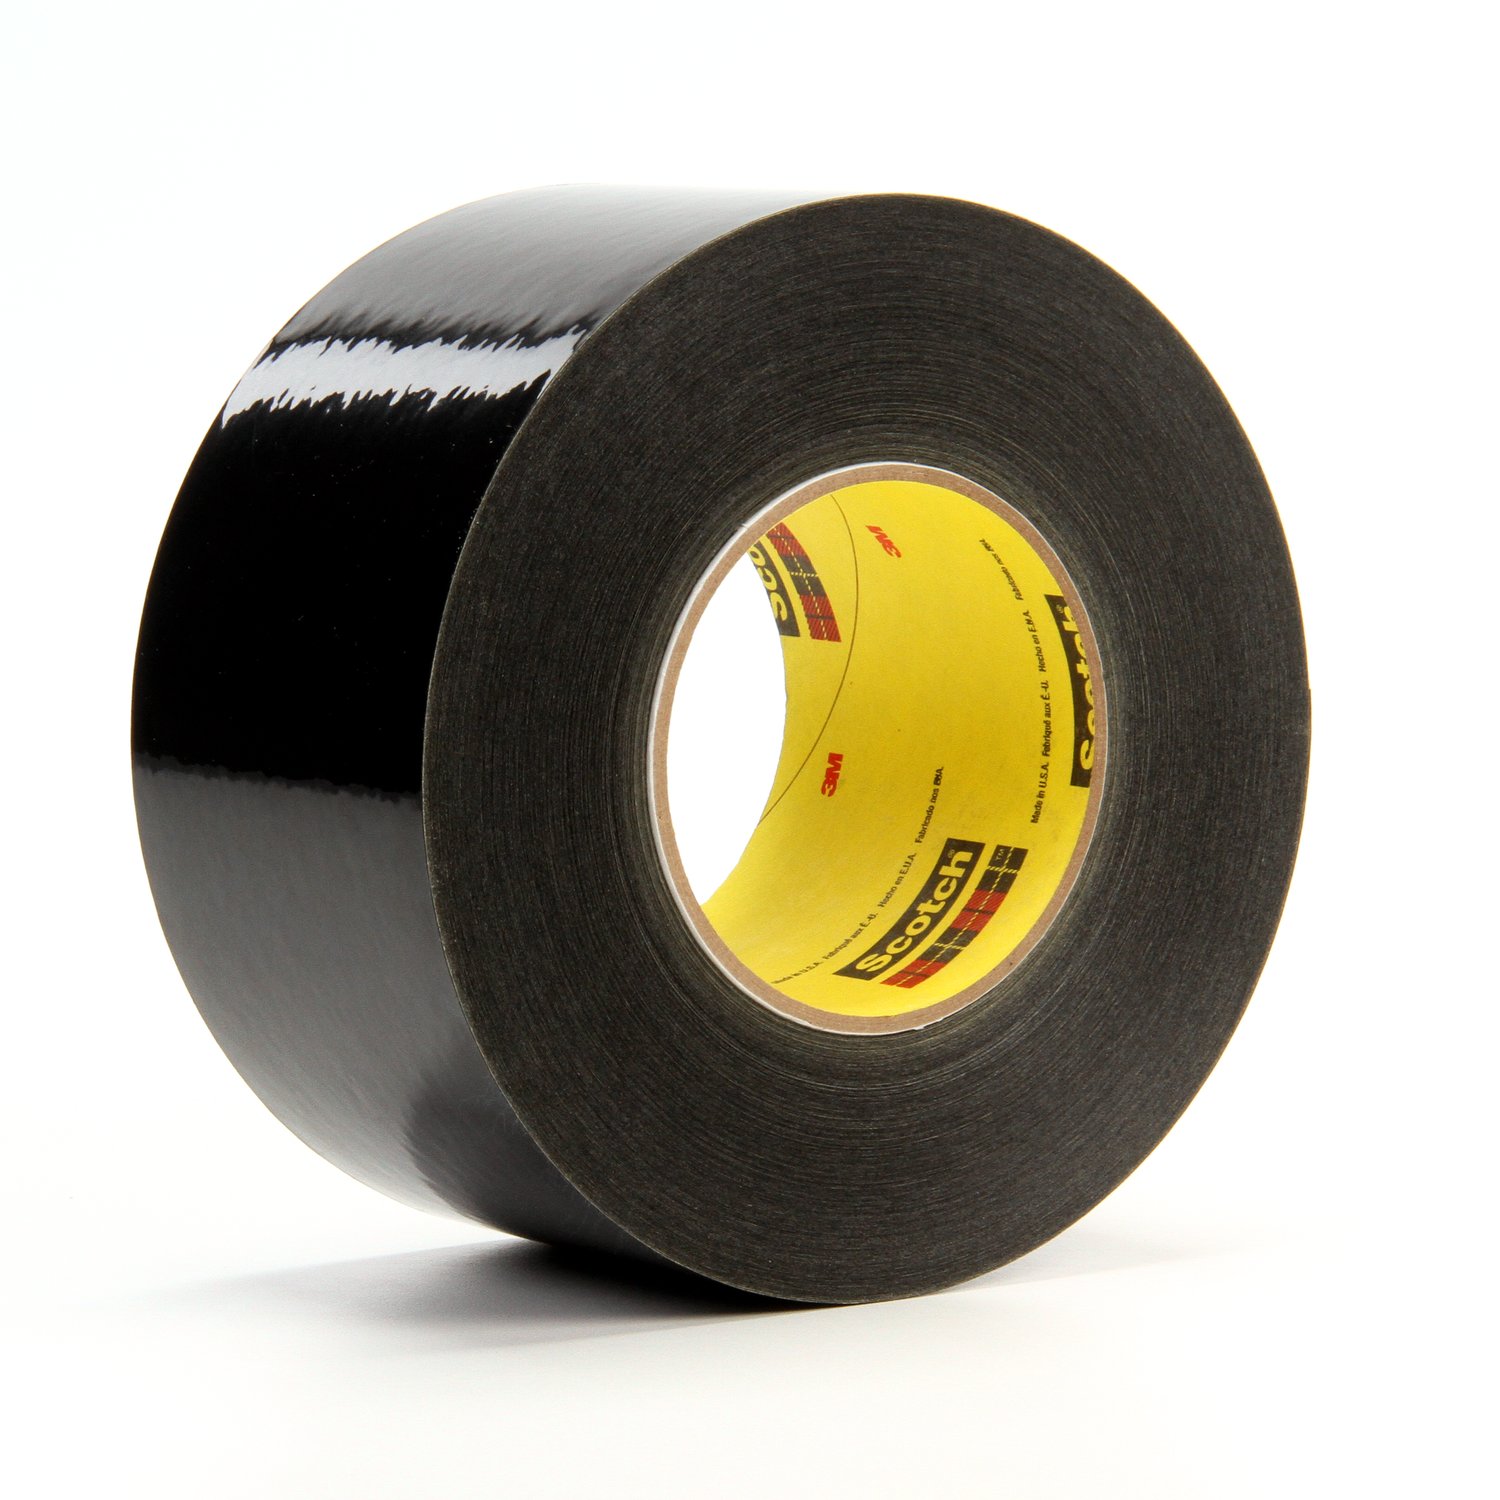 7010373601 - Scotch Solvent Resistant Masking Tape 226, Black, 3 in x 60 yd, 10.6
mil, 12/Case